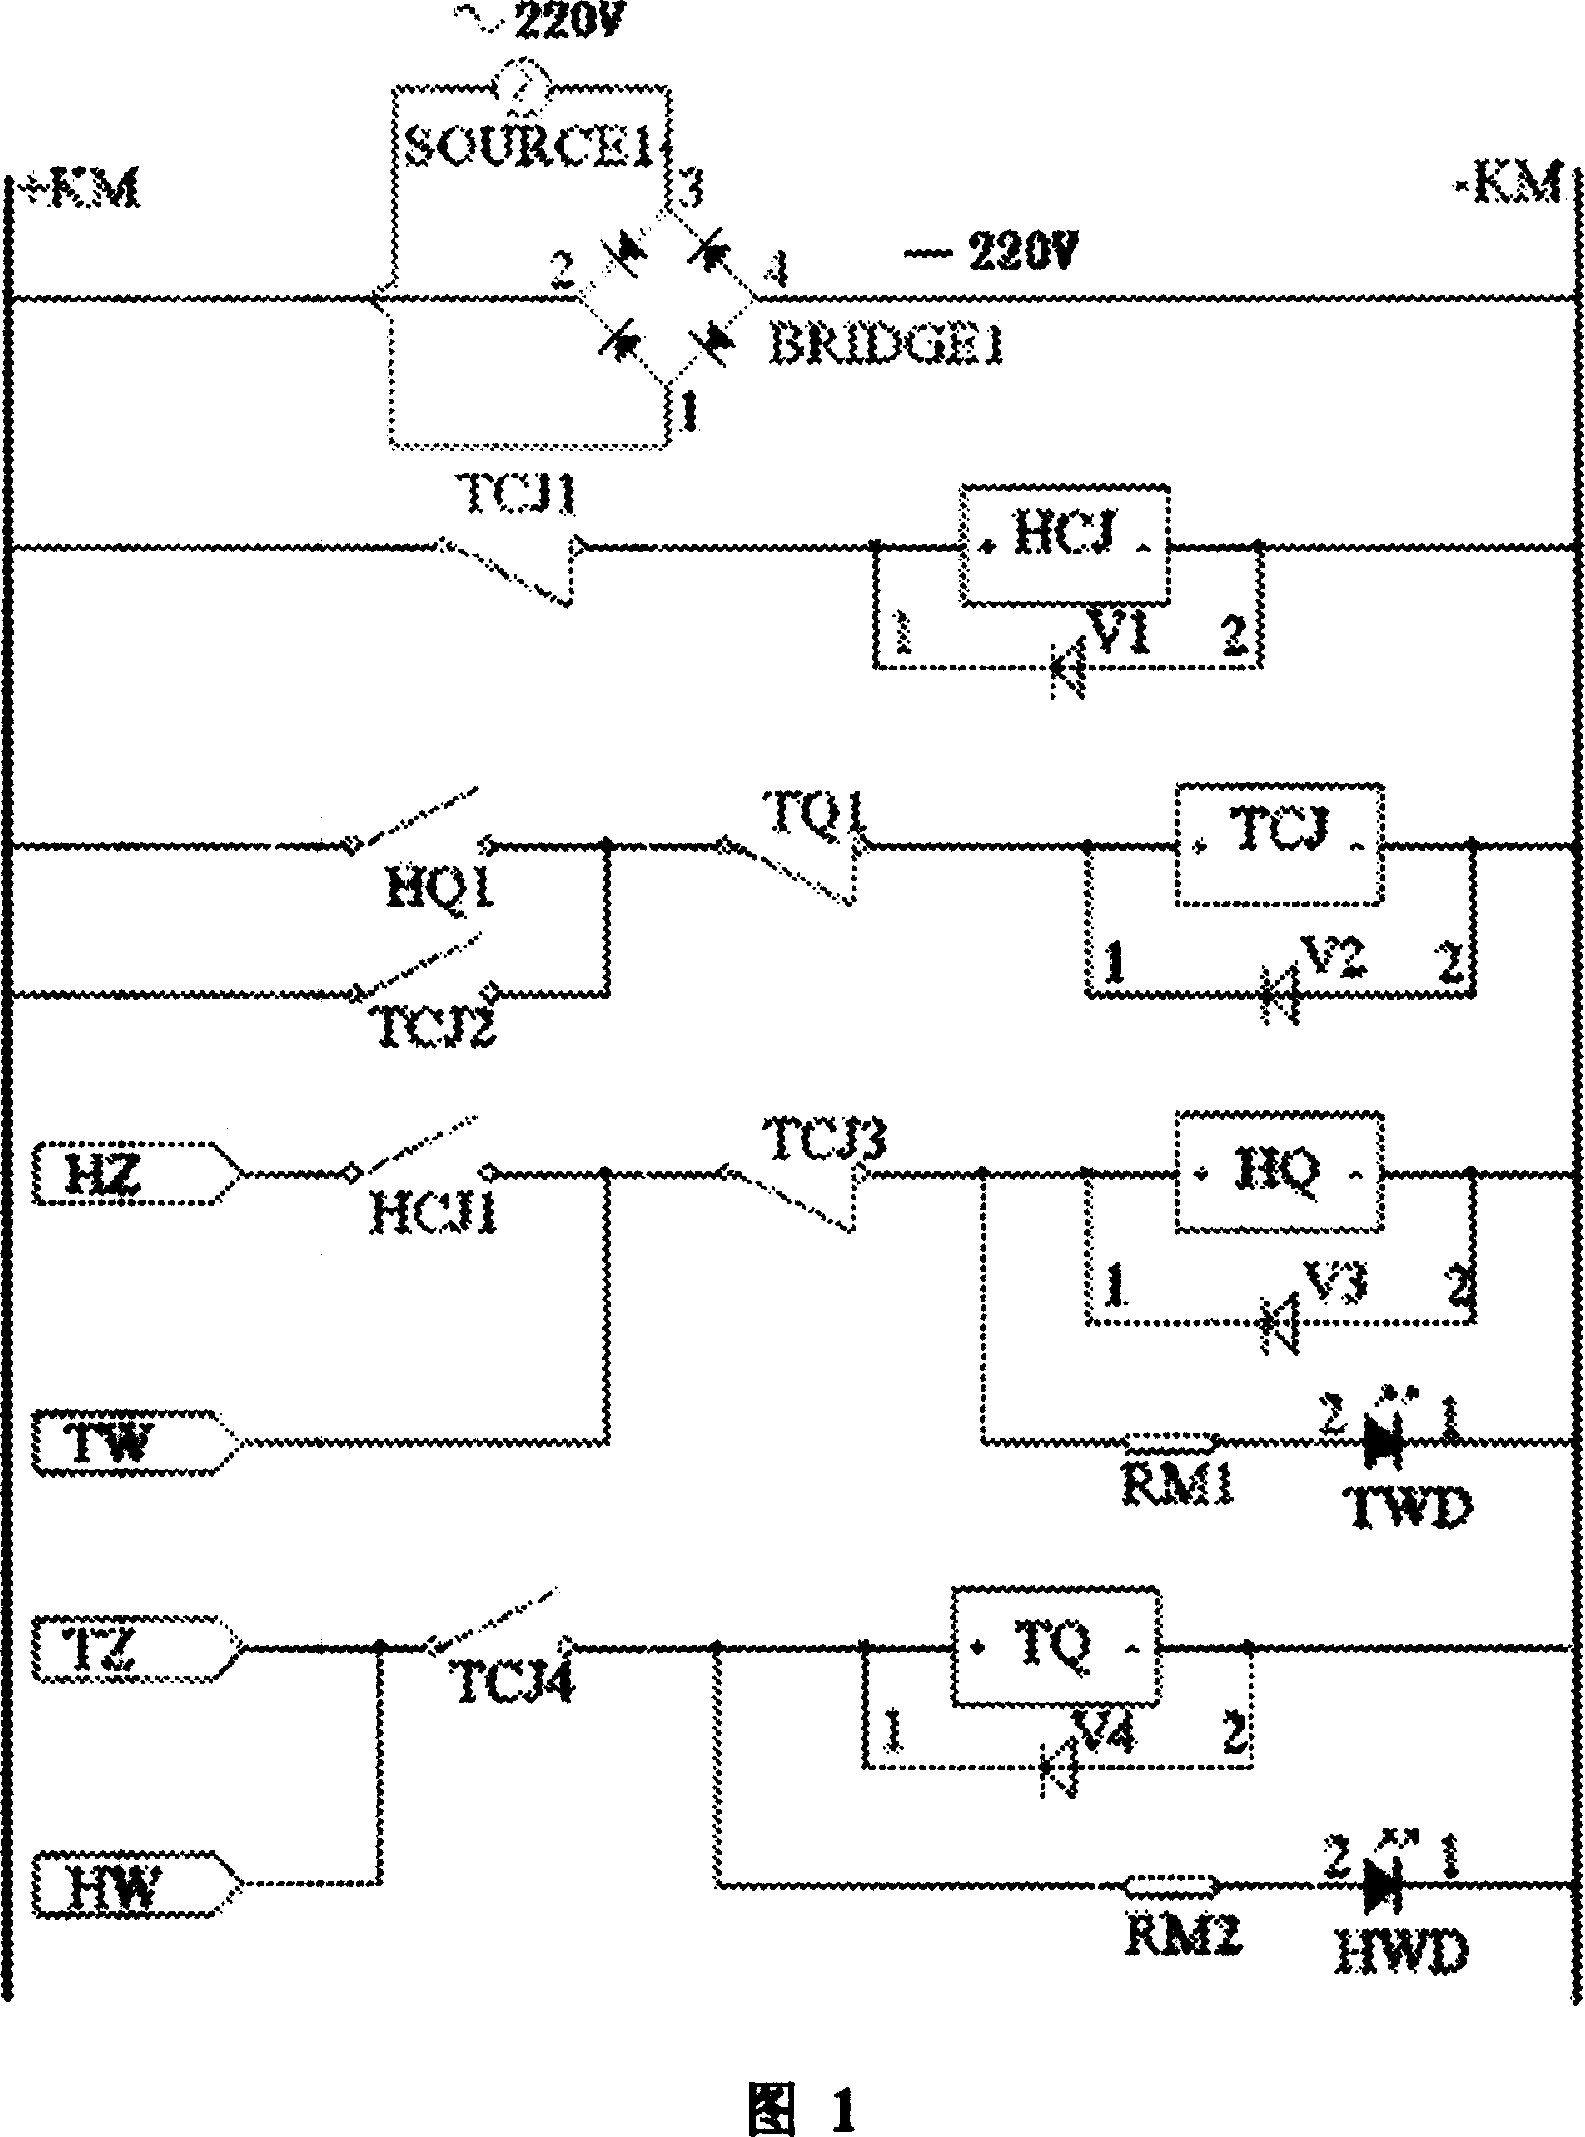 Simple and convenient analog breaker circuit